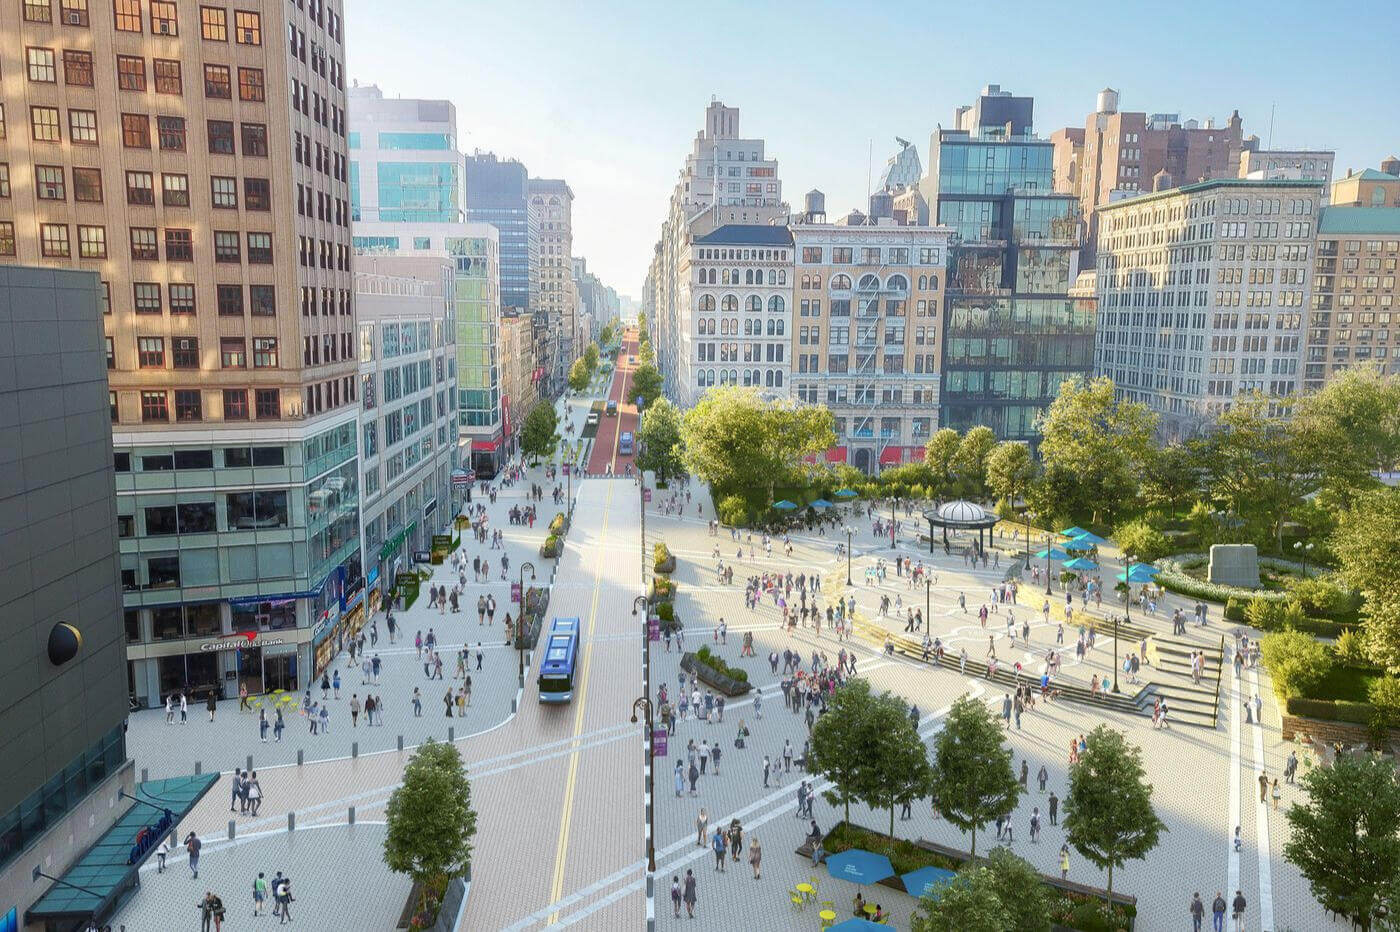 Rendering of a transformed Union Square, with busways, trees, public seating, and loads of pedestrians.